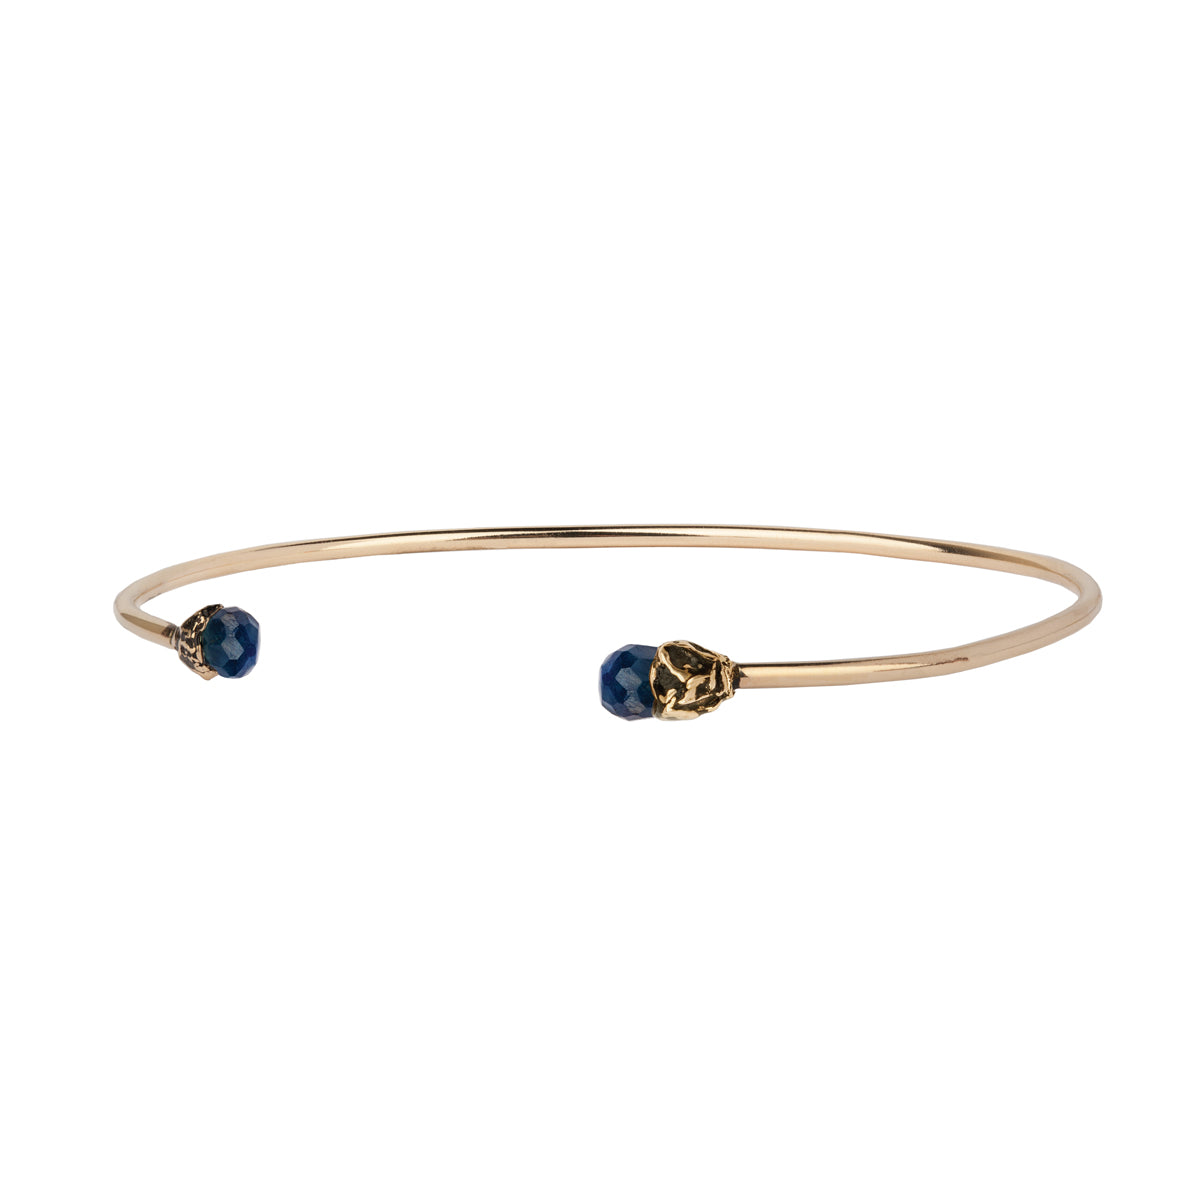 A 14k gold bangle made to hold charms capped with a semi precious sapphire stone representing loyalty.